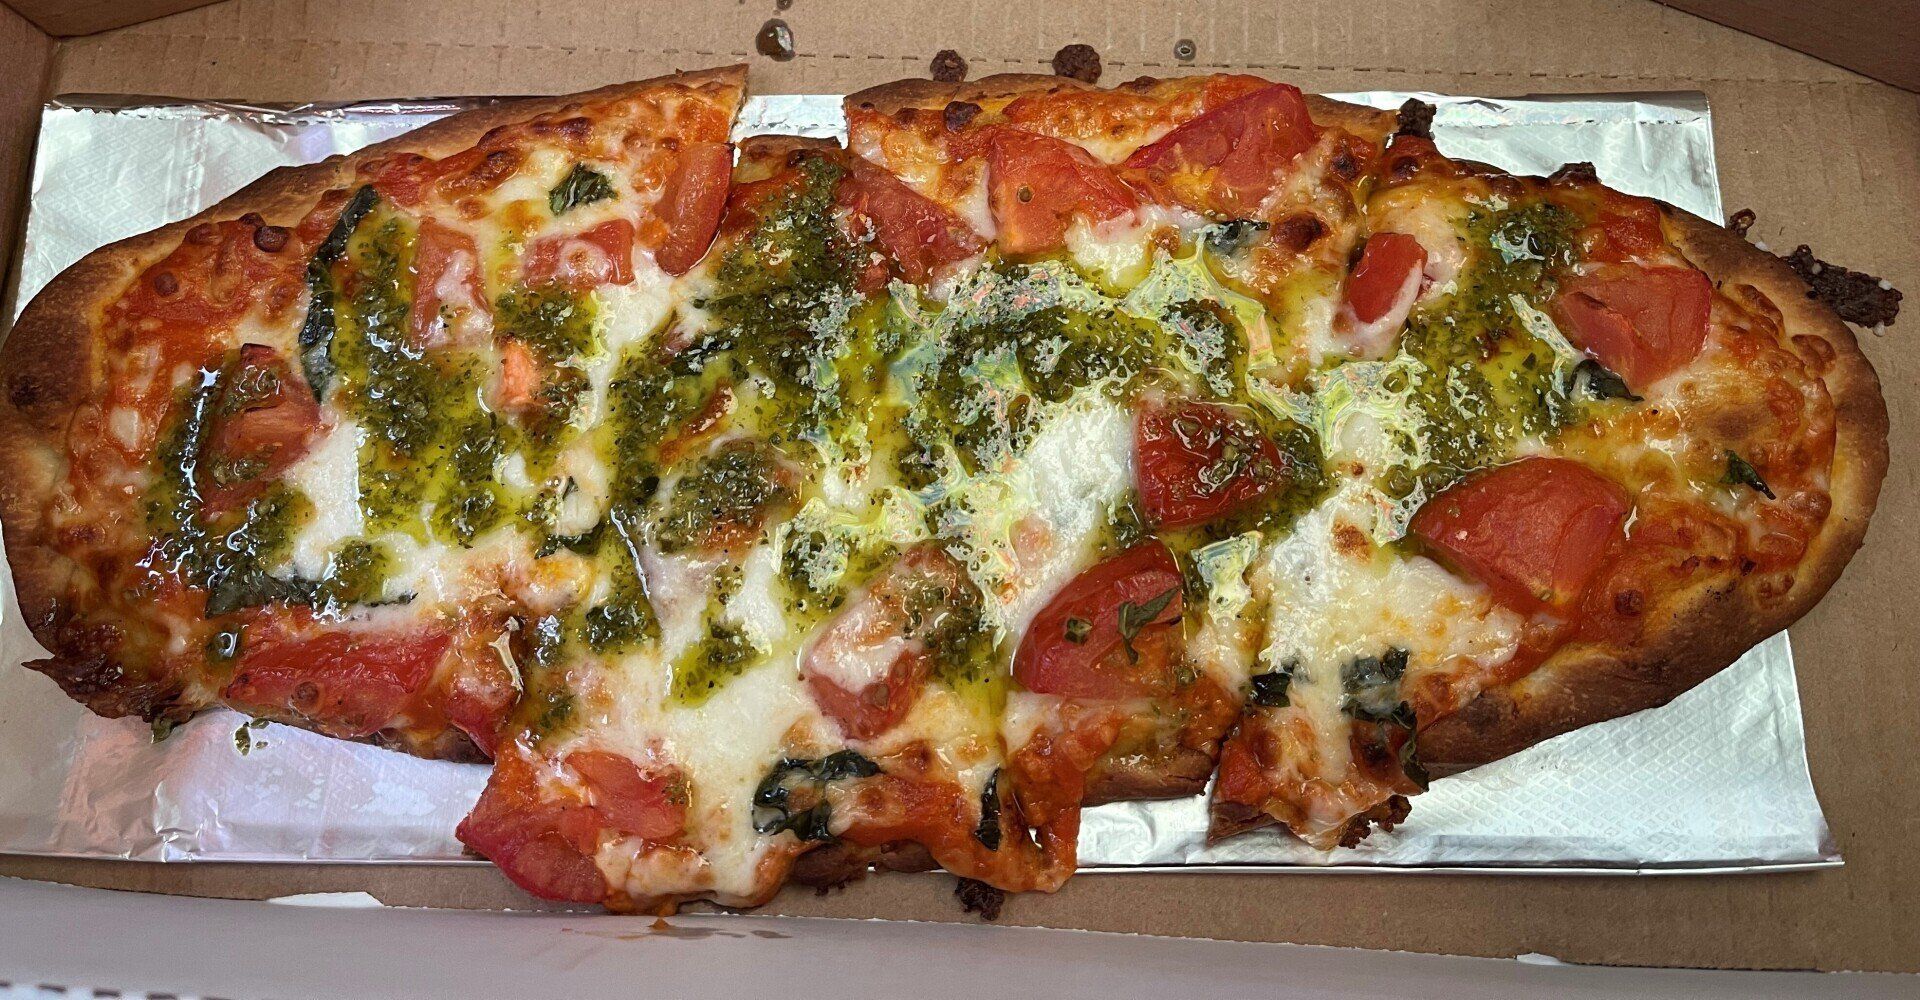 A pizza in a box with a slice missing